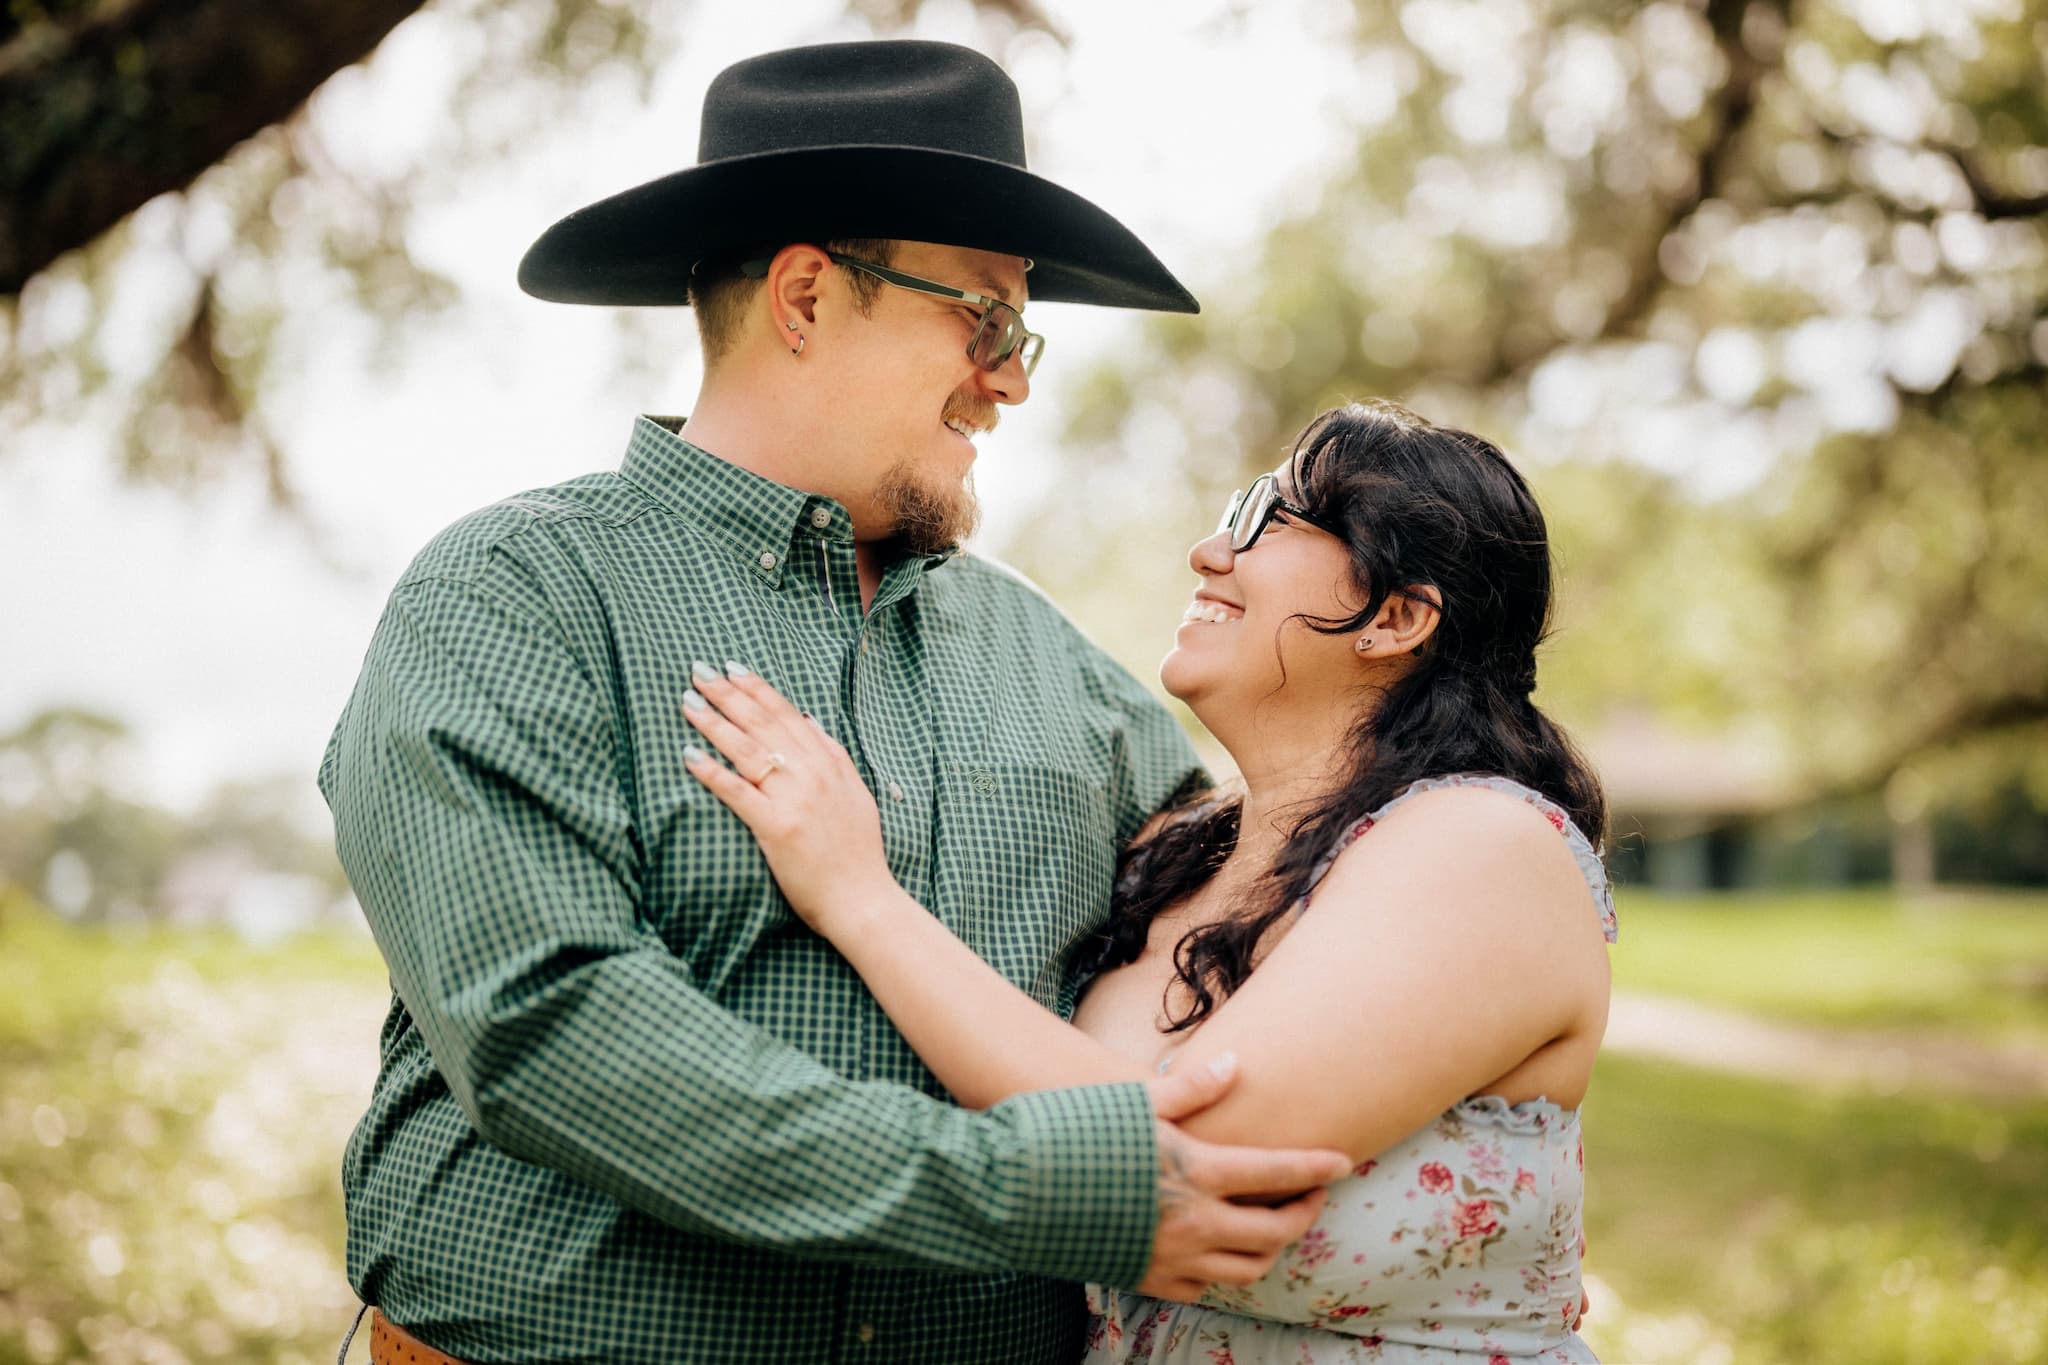 Engagement Session in Brazos Bend State Park: The Love Story of Maria & Richard